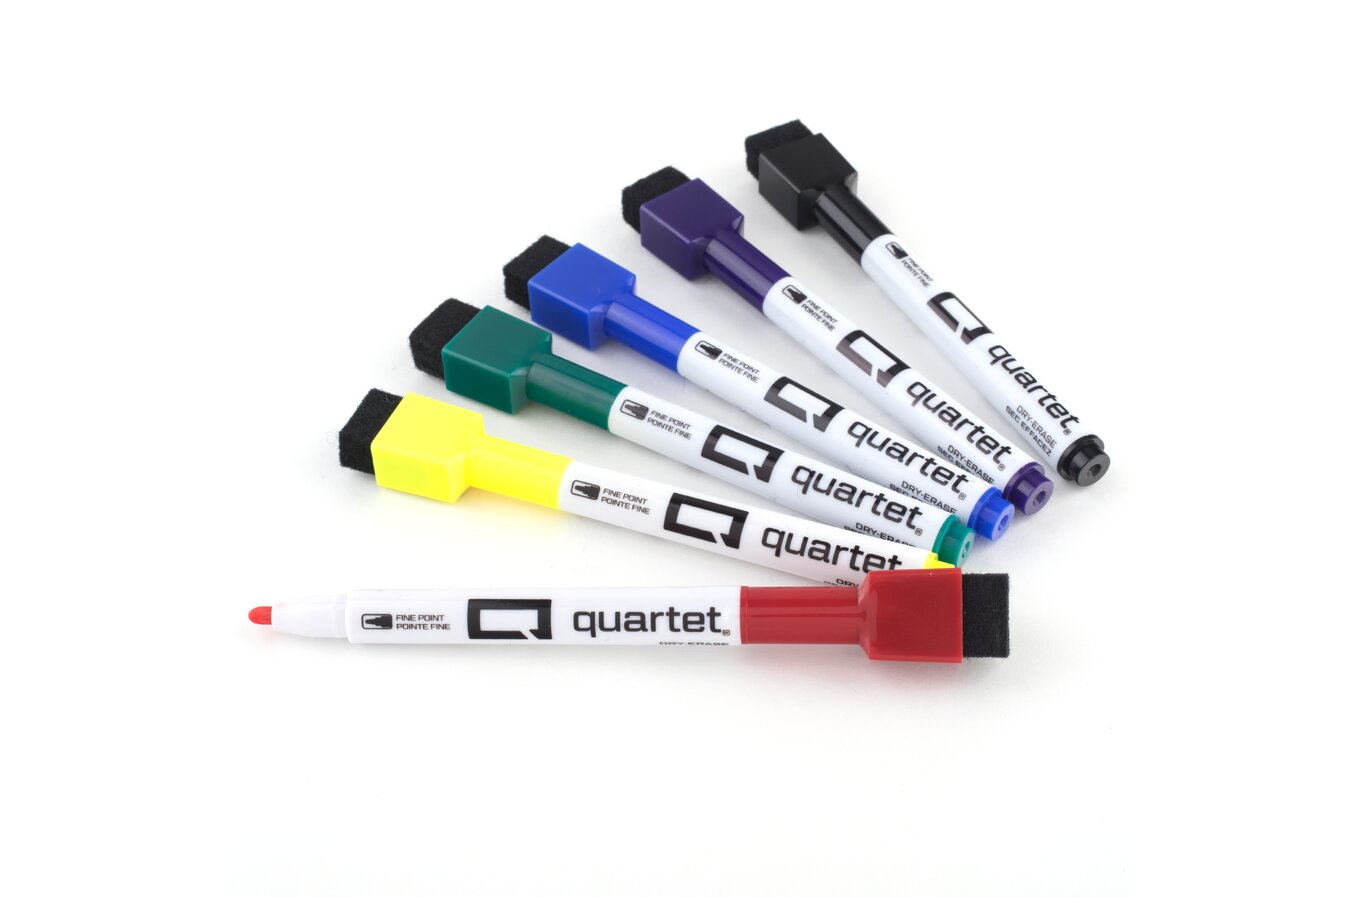 Dry Erase Markers - 6 Pack